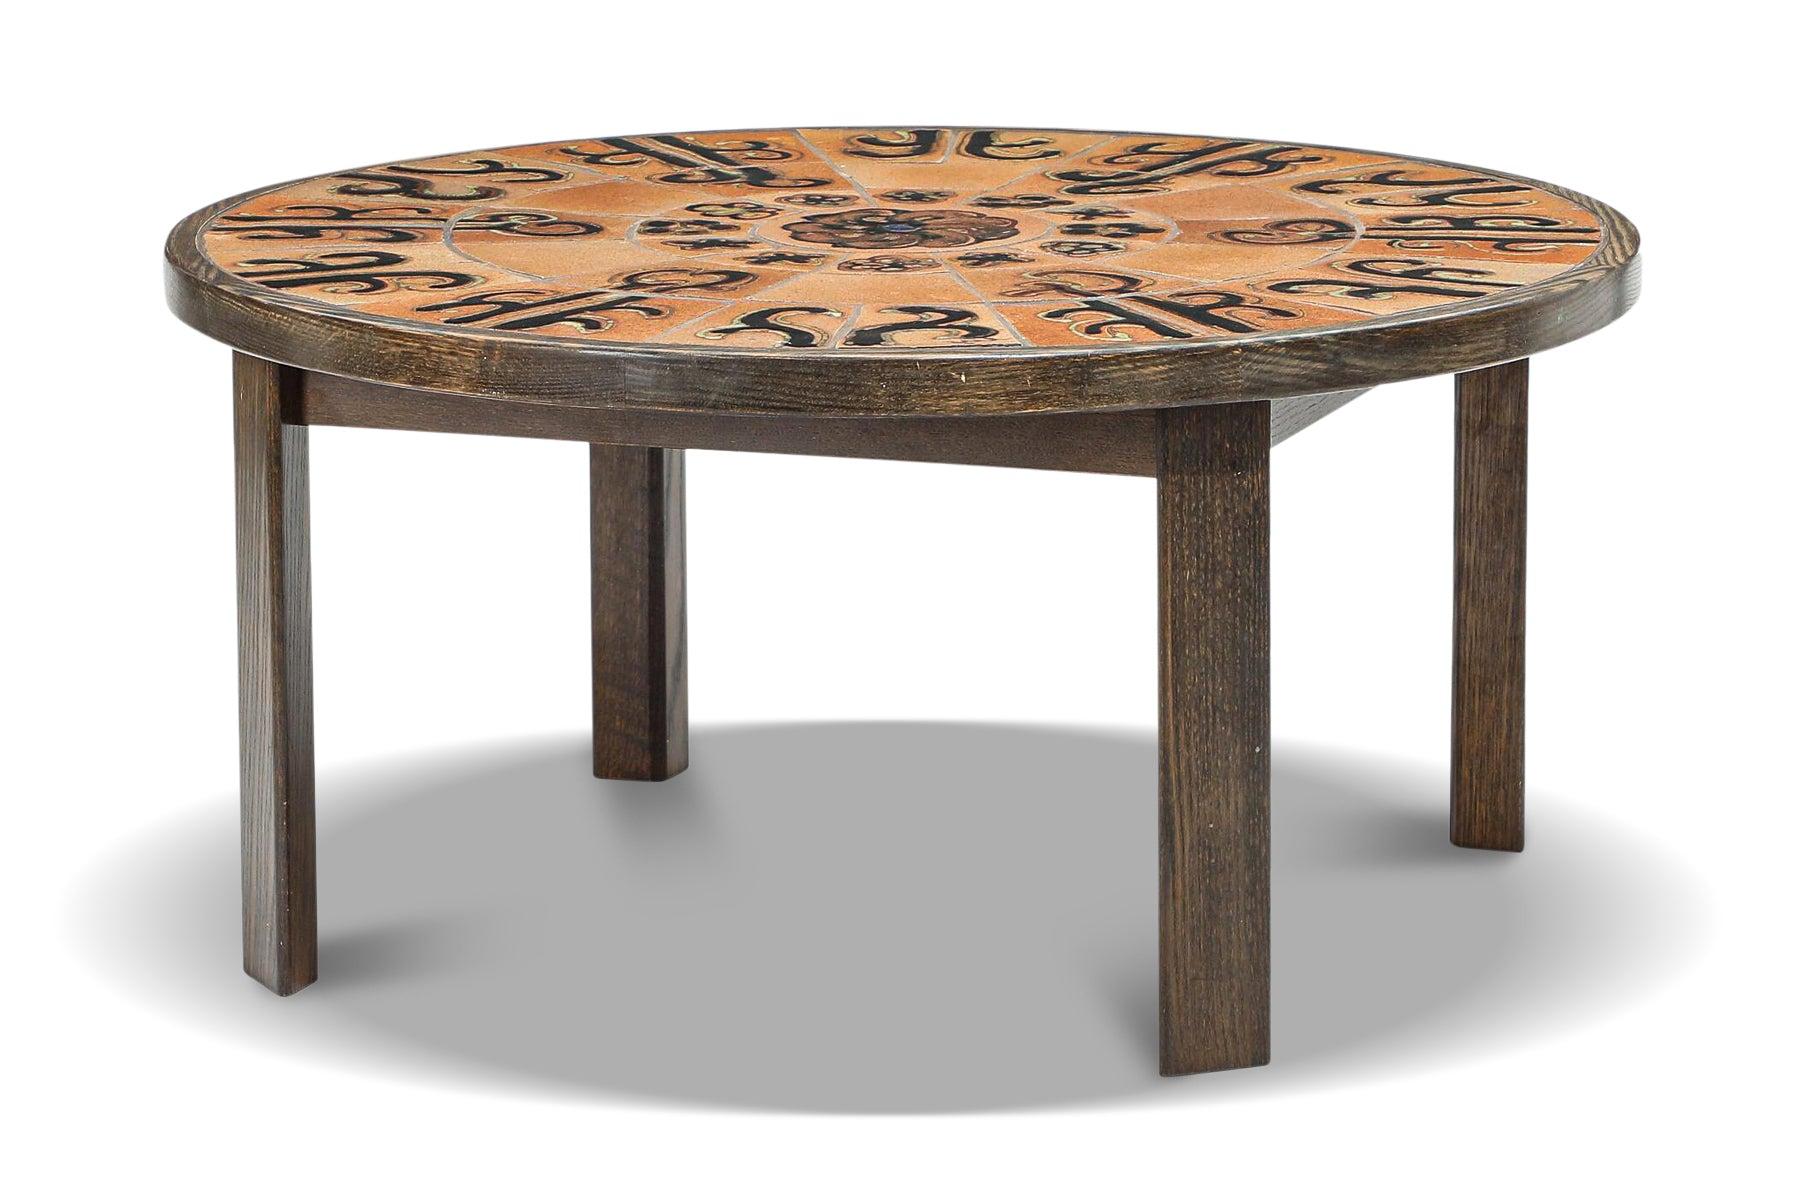 Danish Round Stained Oak + Tile Coffee Table by Tue Poulsen